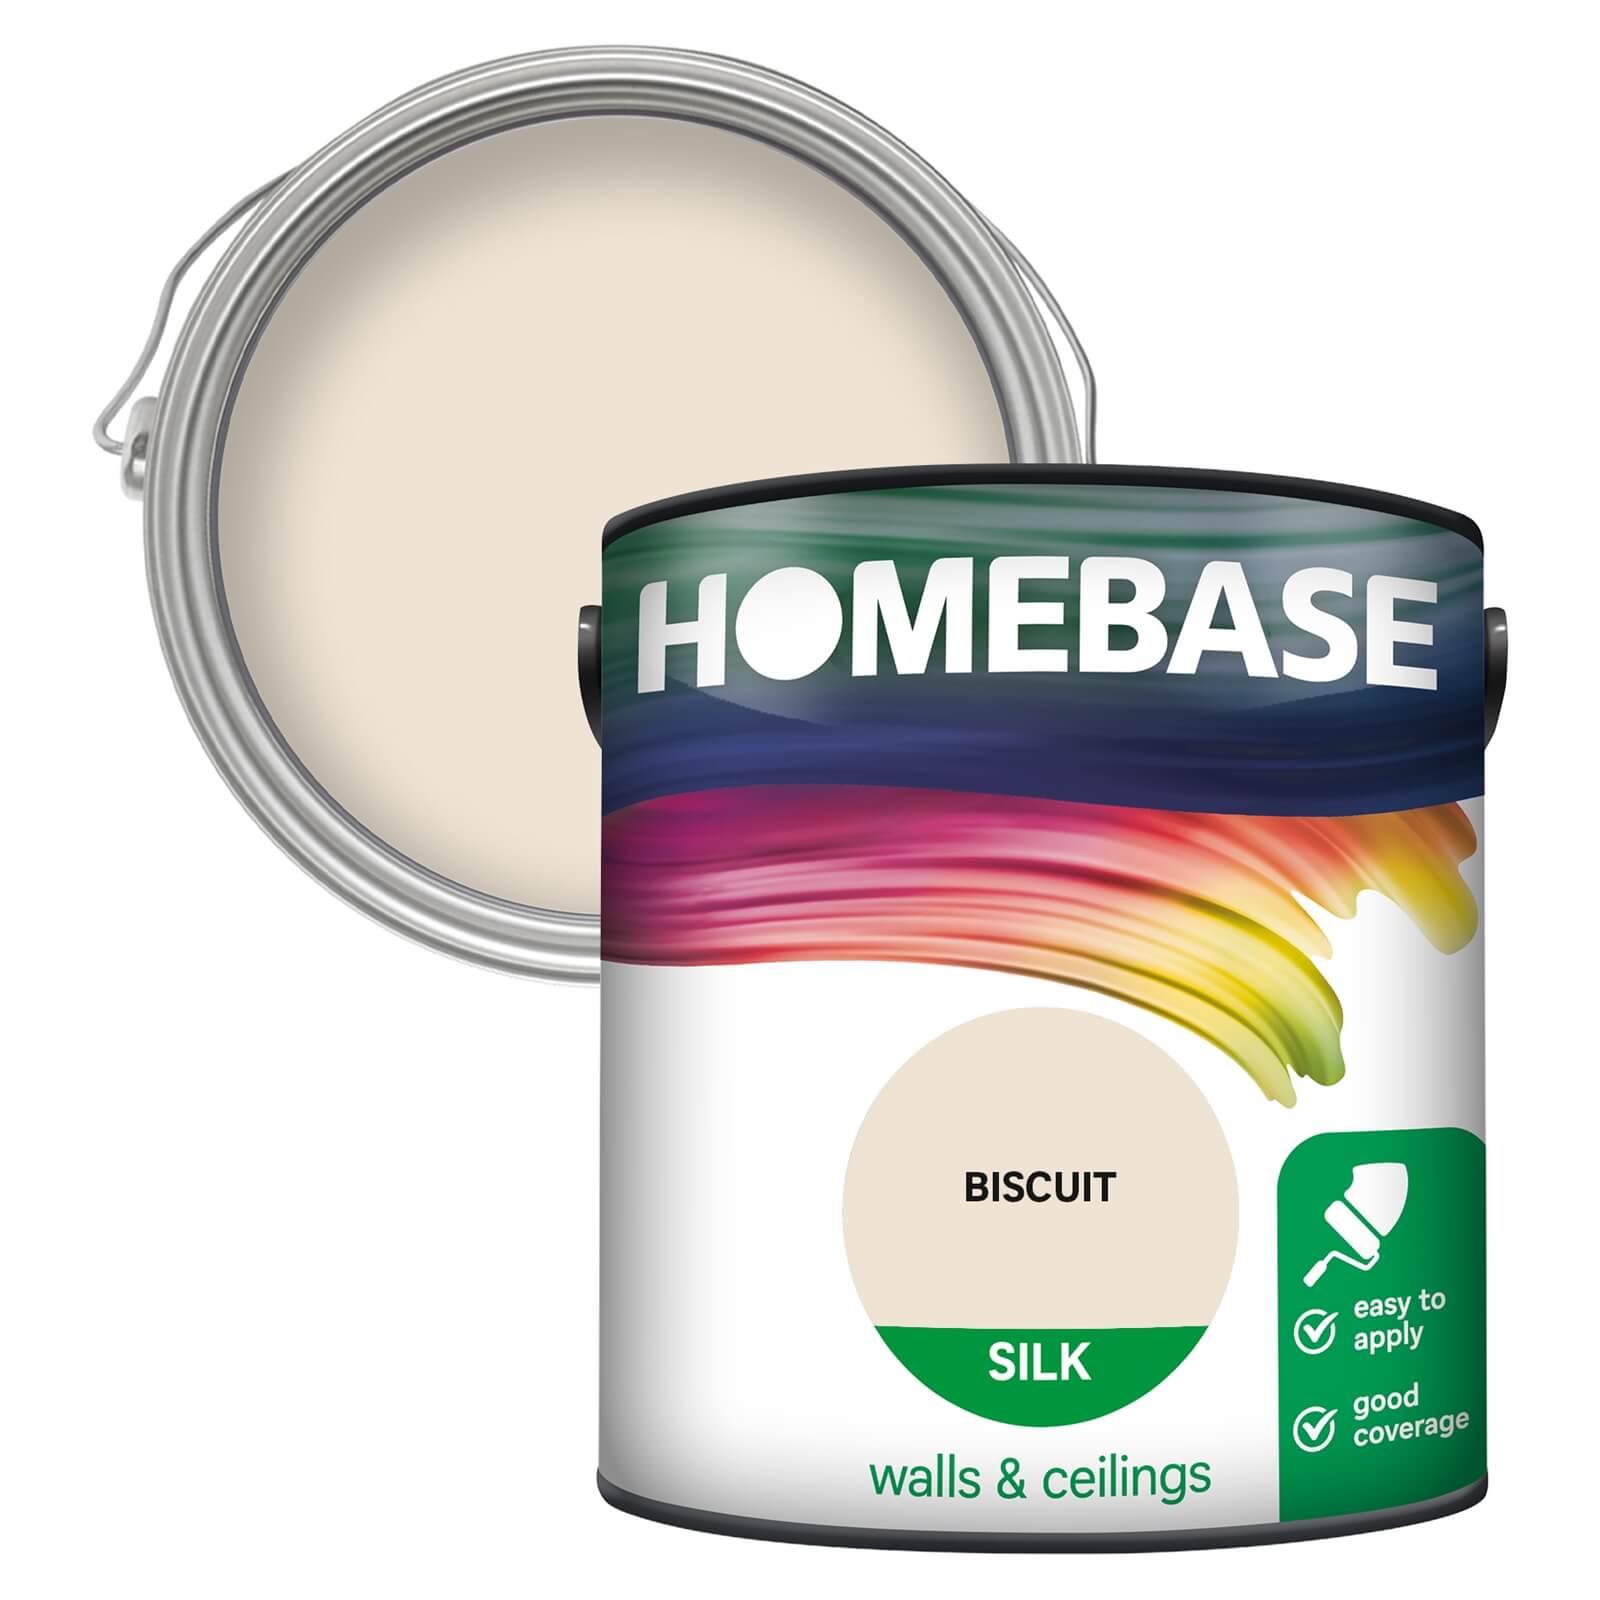 Photo of Homebase Silk Paint - Biscuit 2.5l